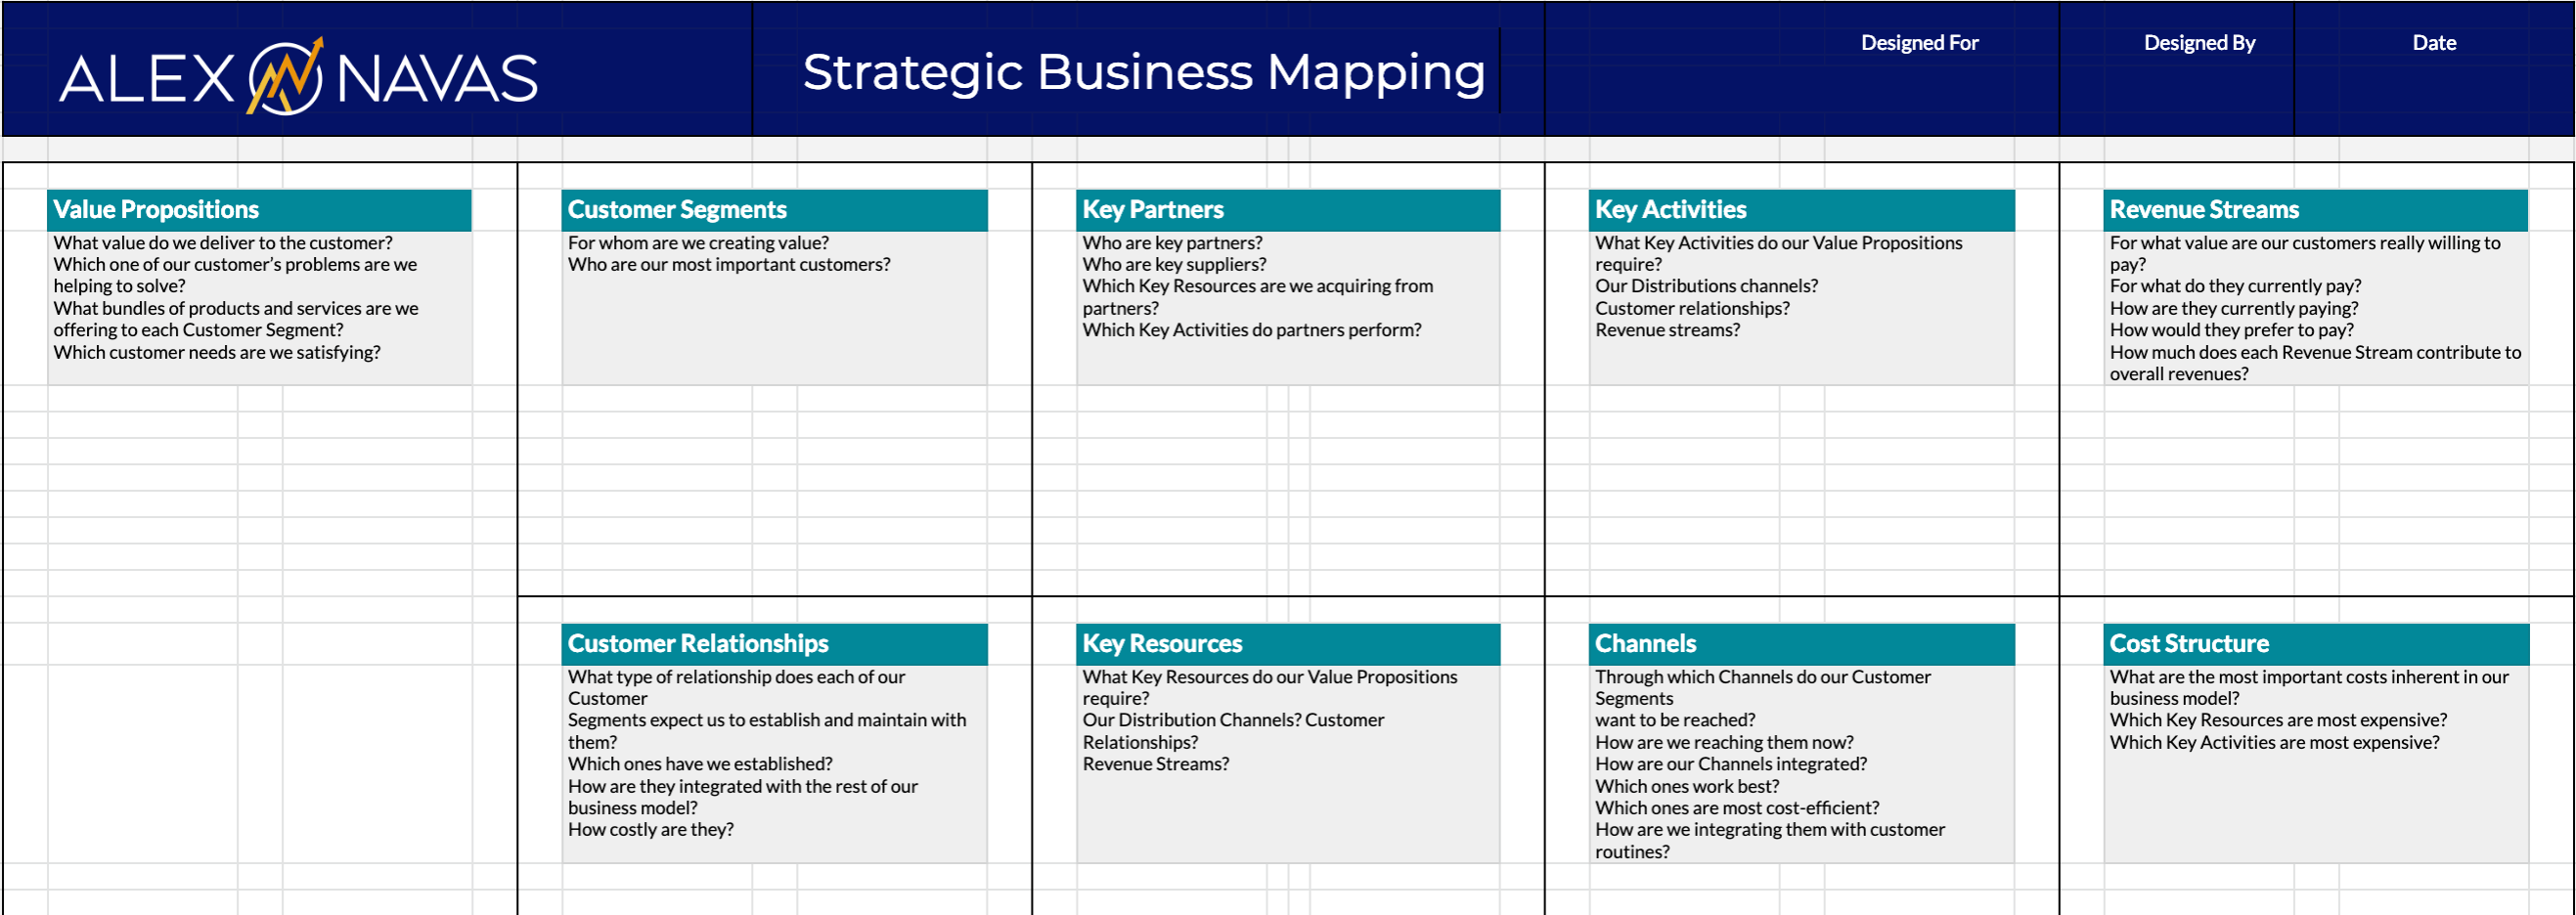 Creating a Strategic Business map to gain clarity